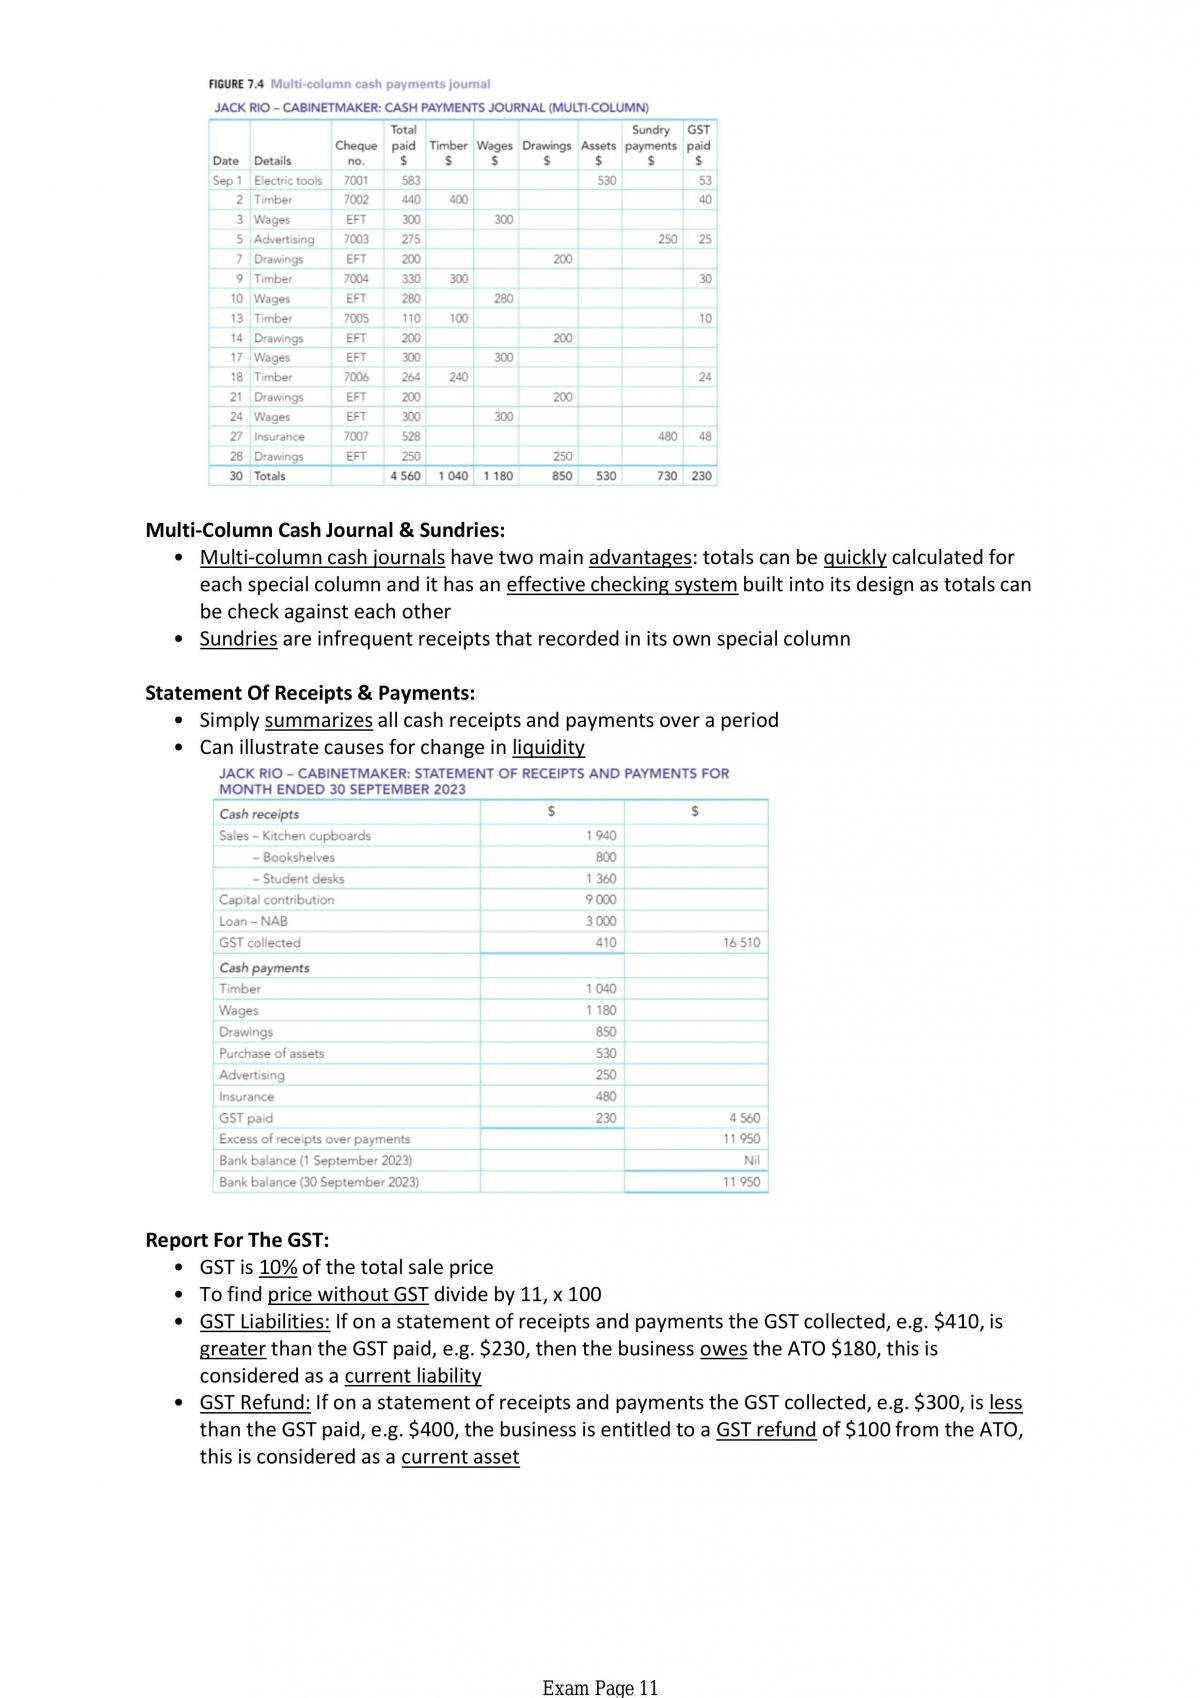 Complete Unit 1 Accounting Exam Notes 2019 - Page 11